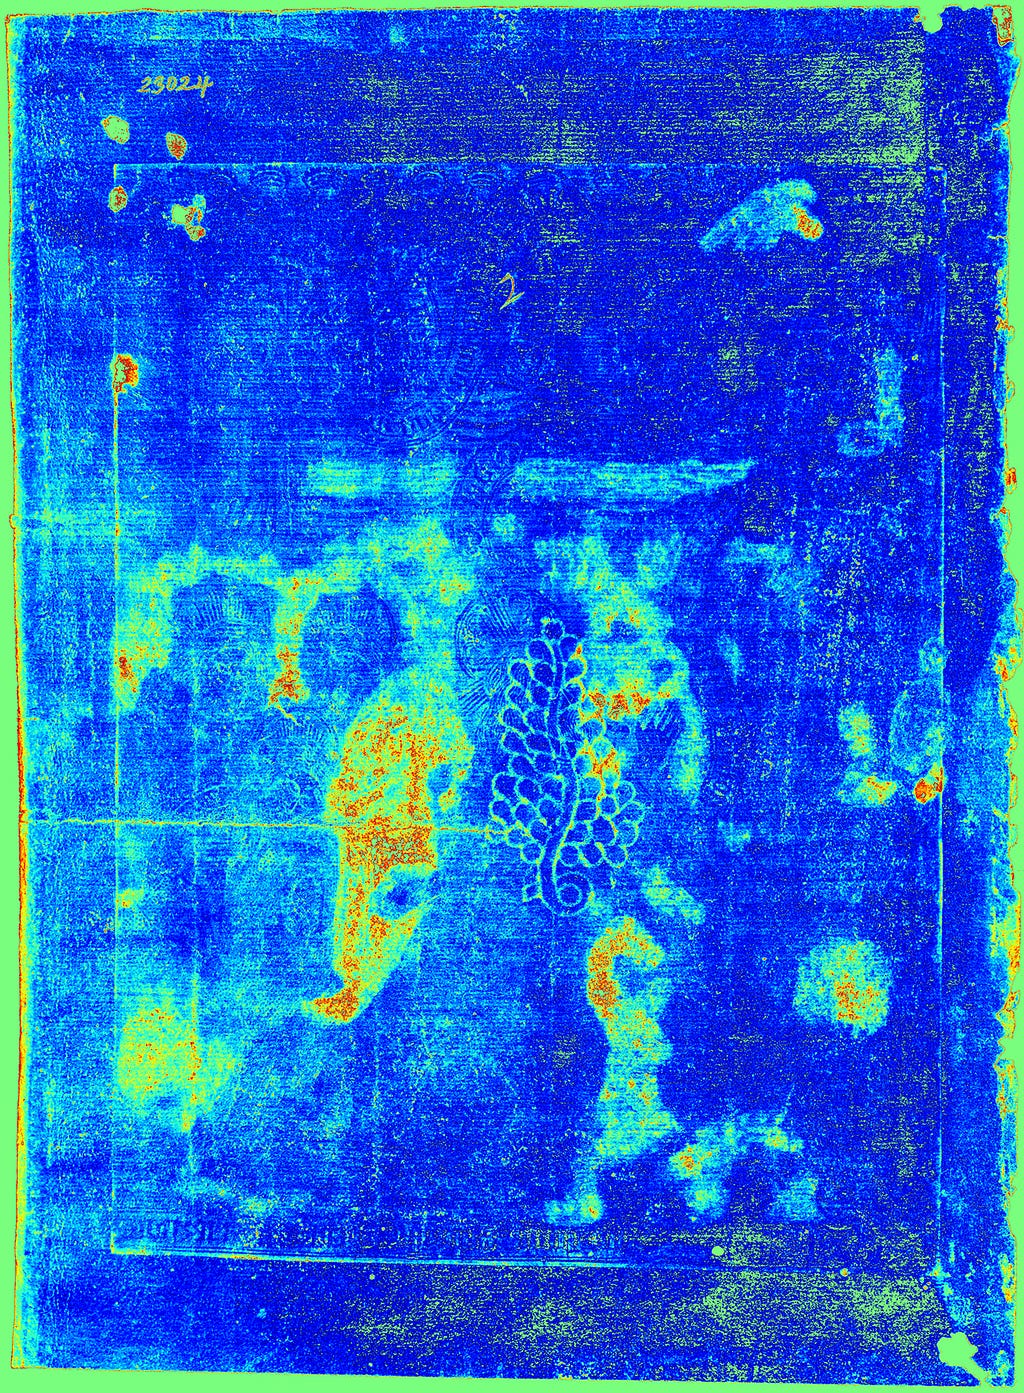 An example of use of multispectral imaging on an early printed book